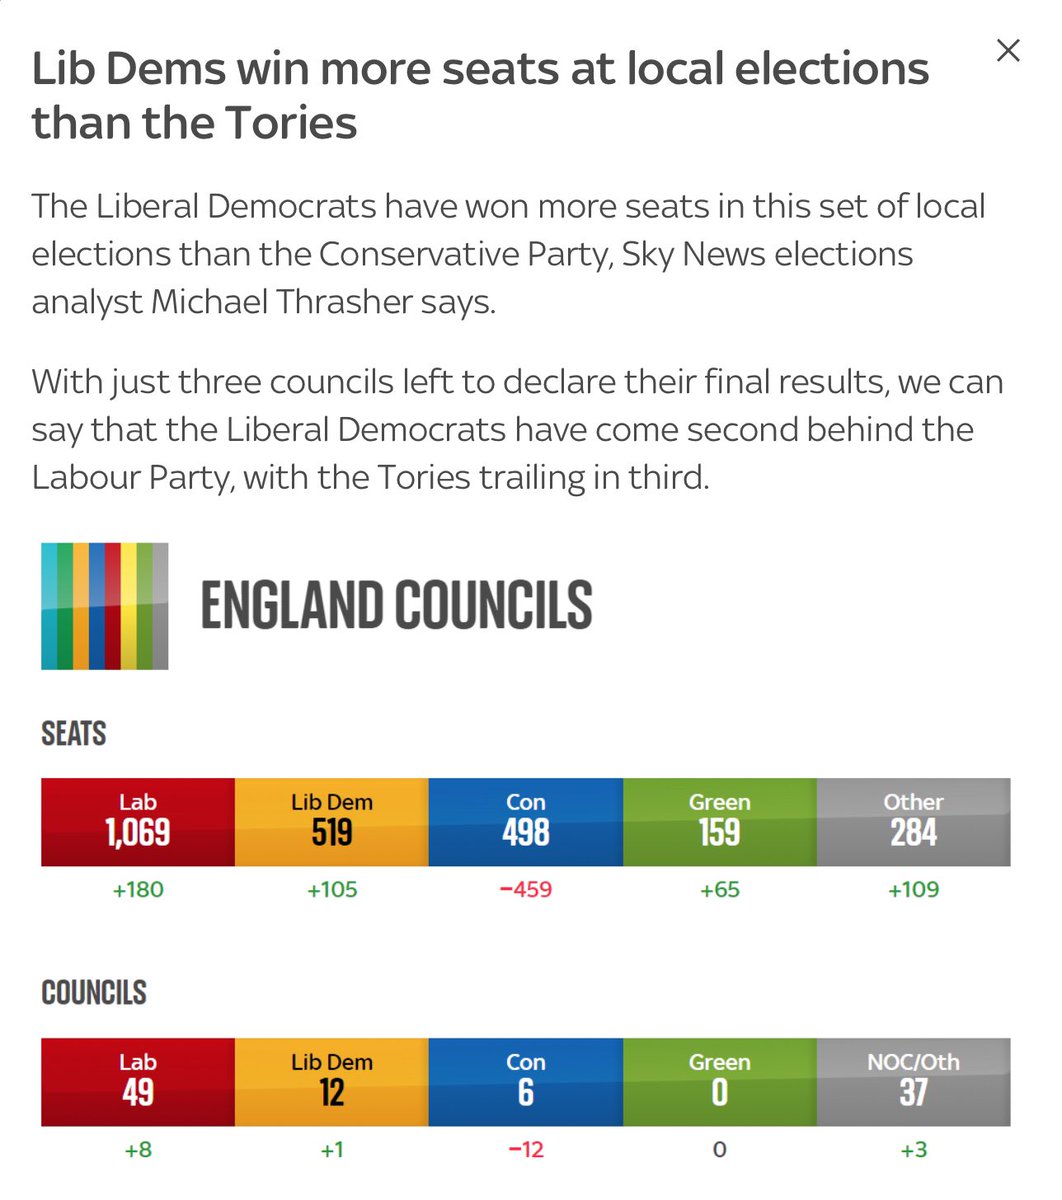 How are the media going to spin this story? Every single party OTHER than the Tories gained seats! 🥂 #ToryWipeout